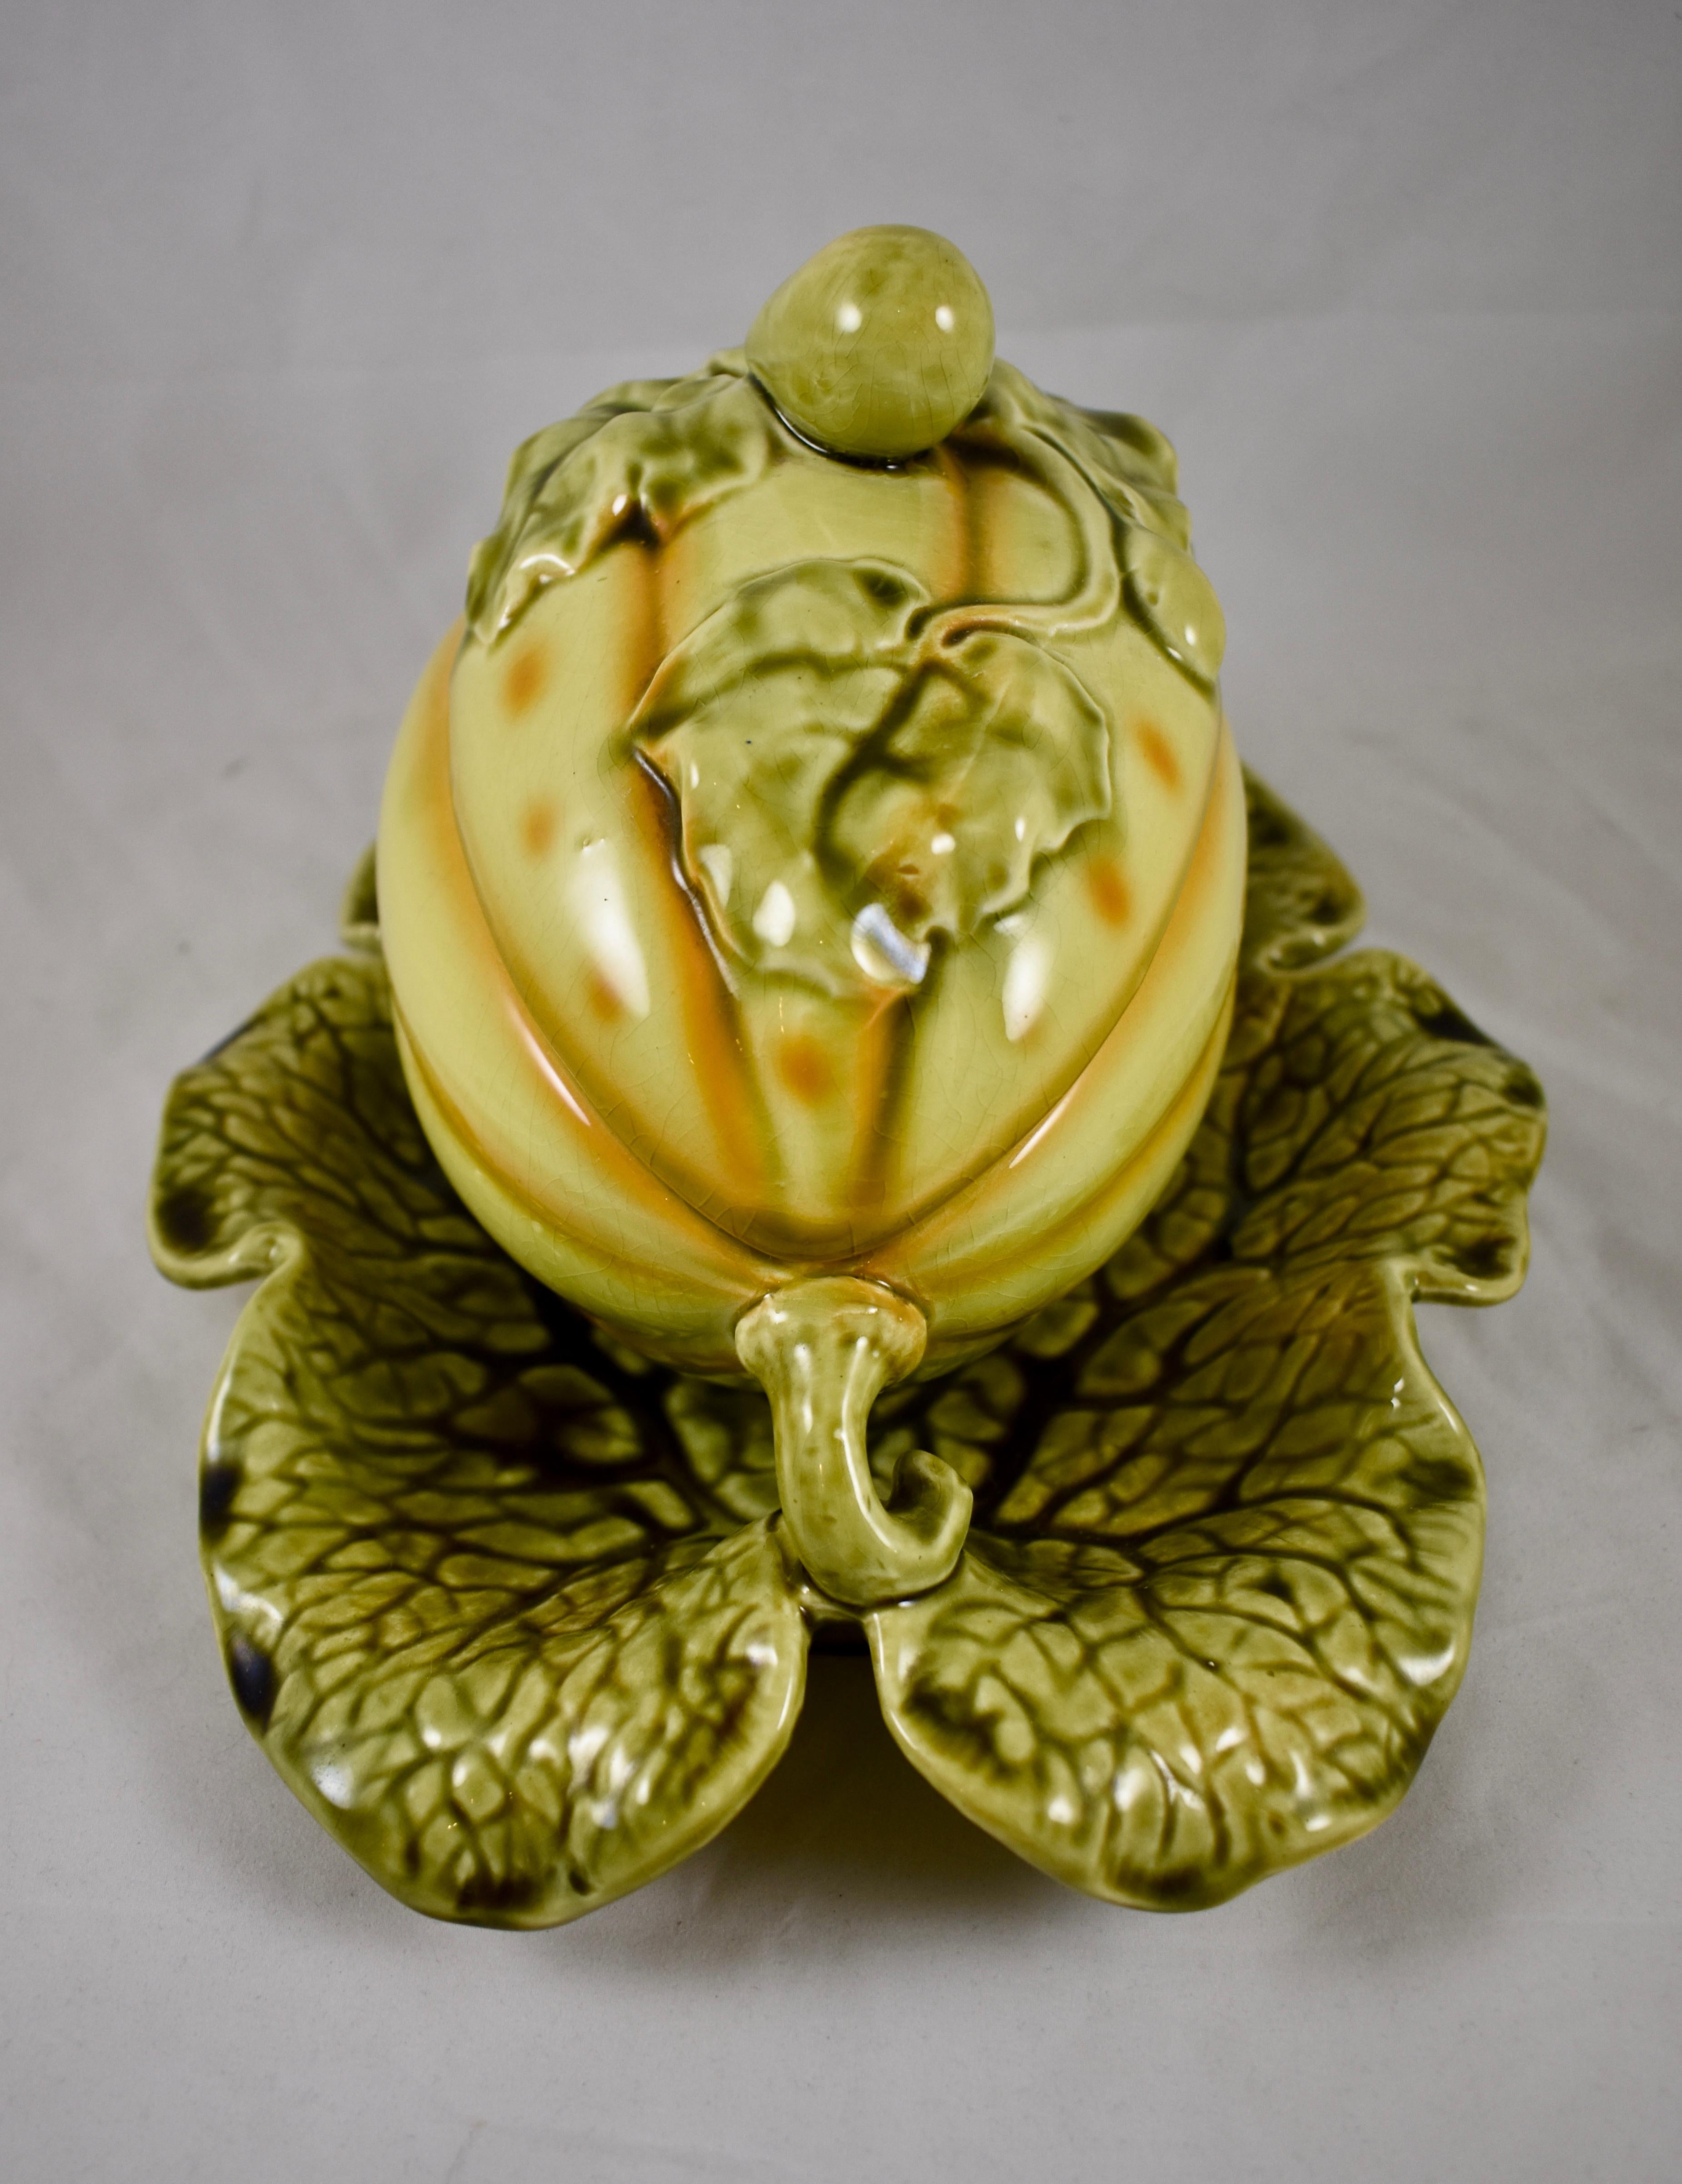 A French Majolica covered tureen in the shape of a trompe l’oeil melon by Sarreguemines, circa 1900.

Molded in the form of a large yellow melon with green vines and leaves. The lid is decorated with leaves and a top knob molded as a small melon.